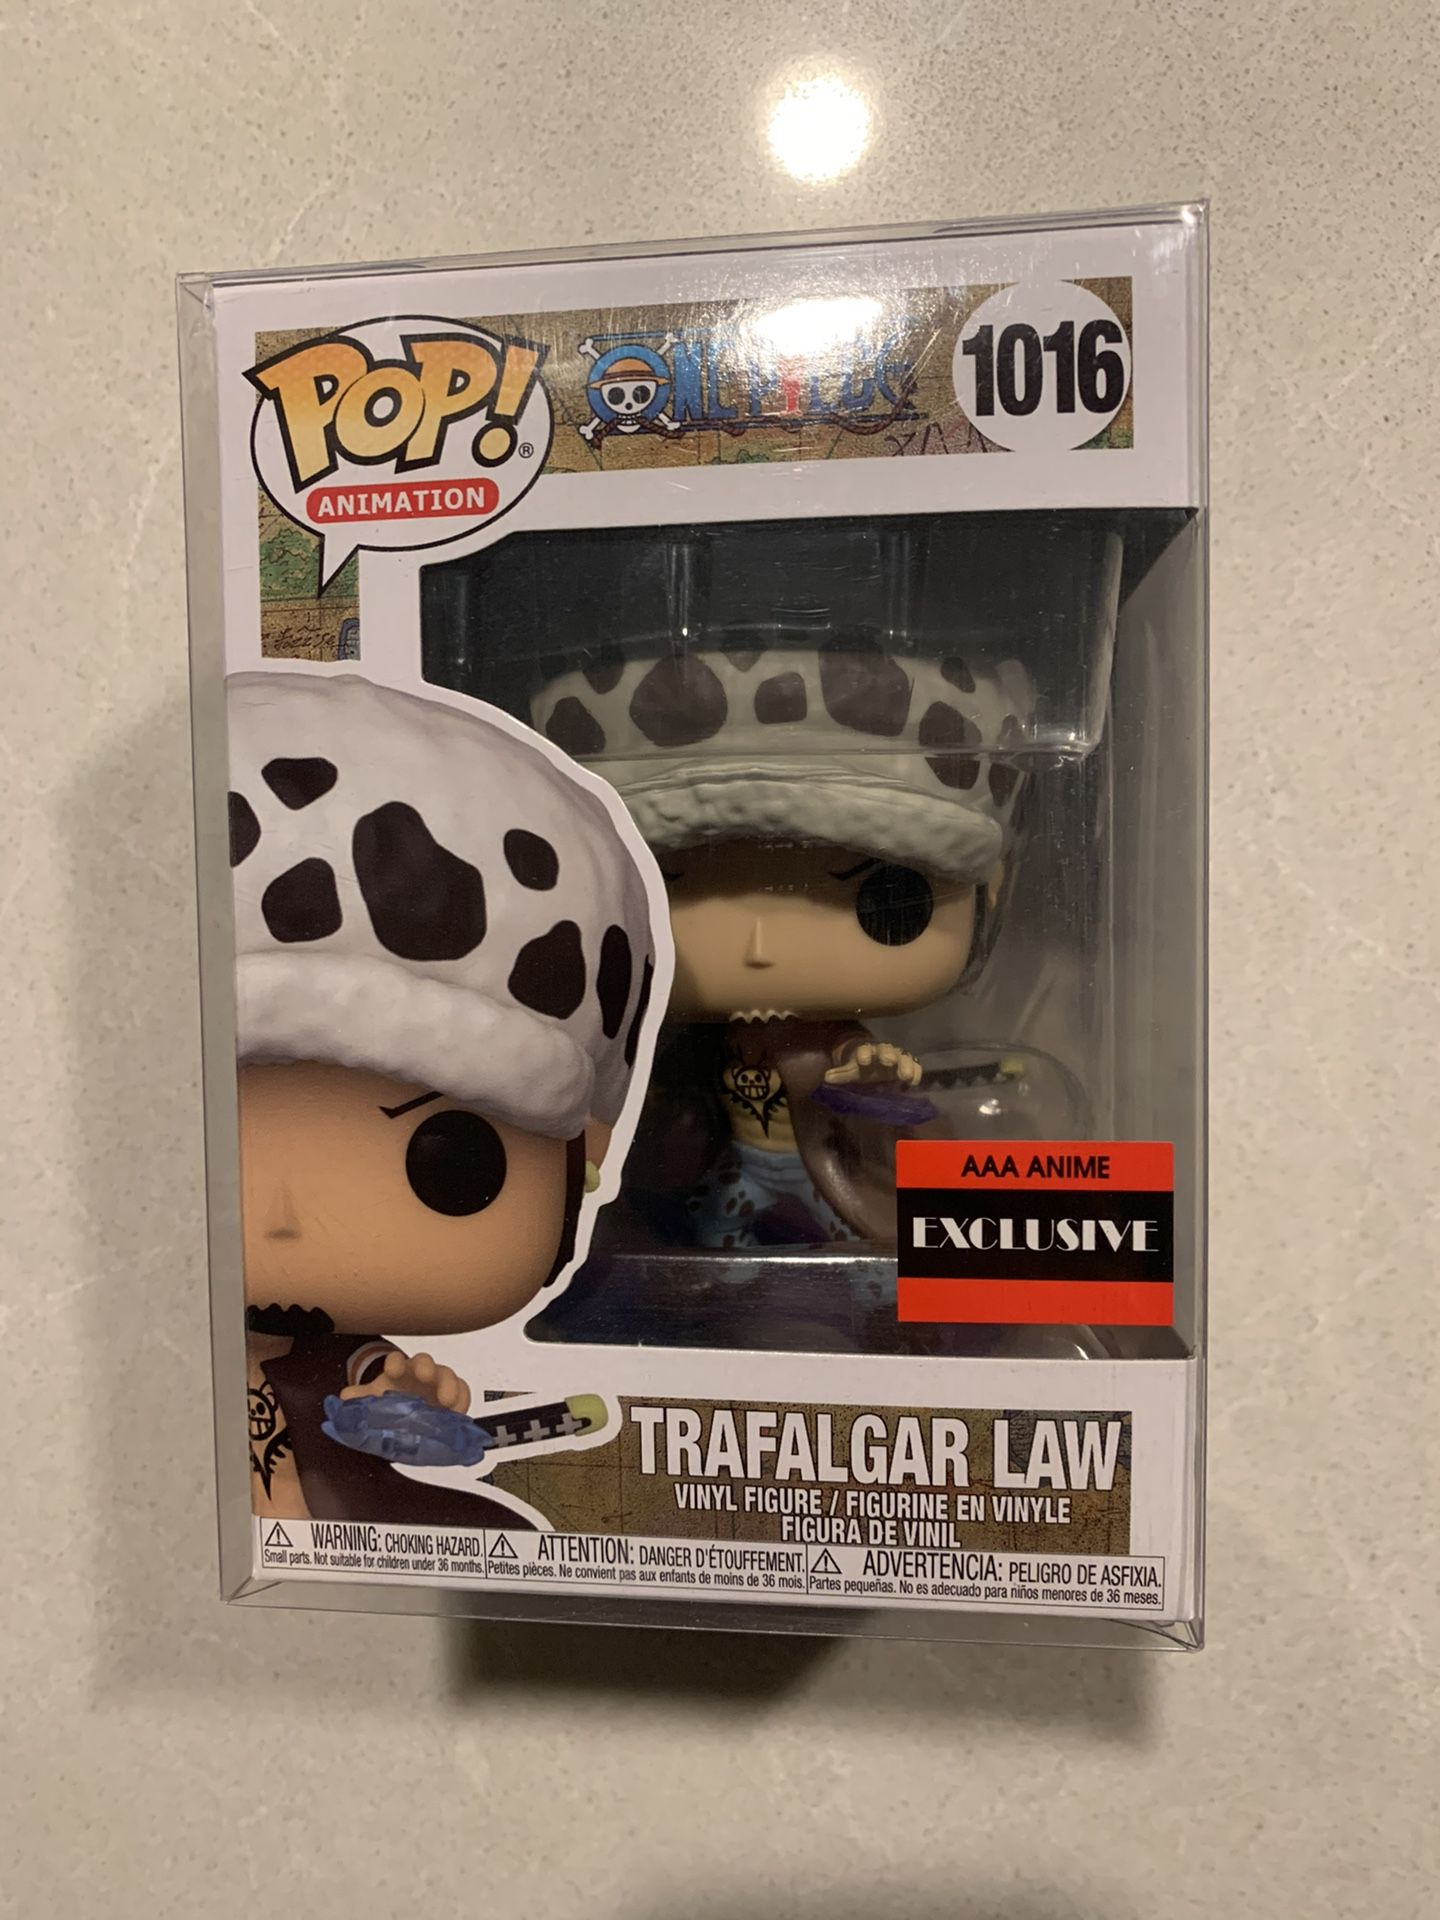 Trafalgar Law Funko Pop *MINT* AAA Anime Exclusive Monkey Luffy One Piece 1016 with protector